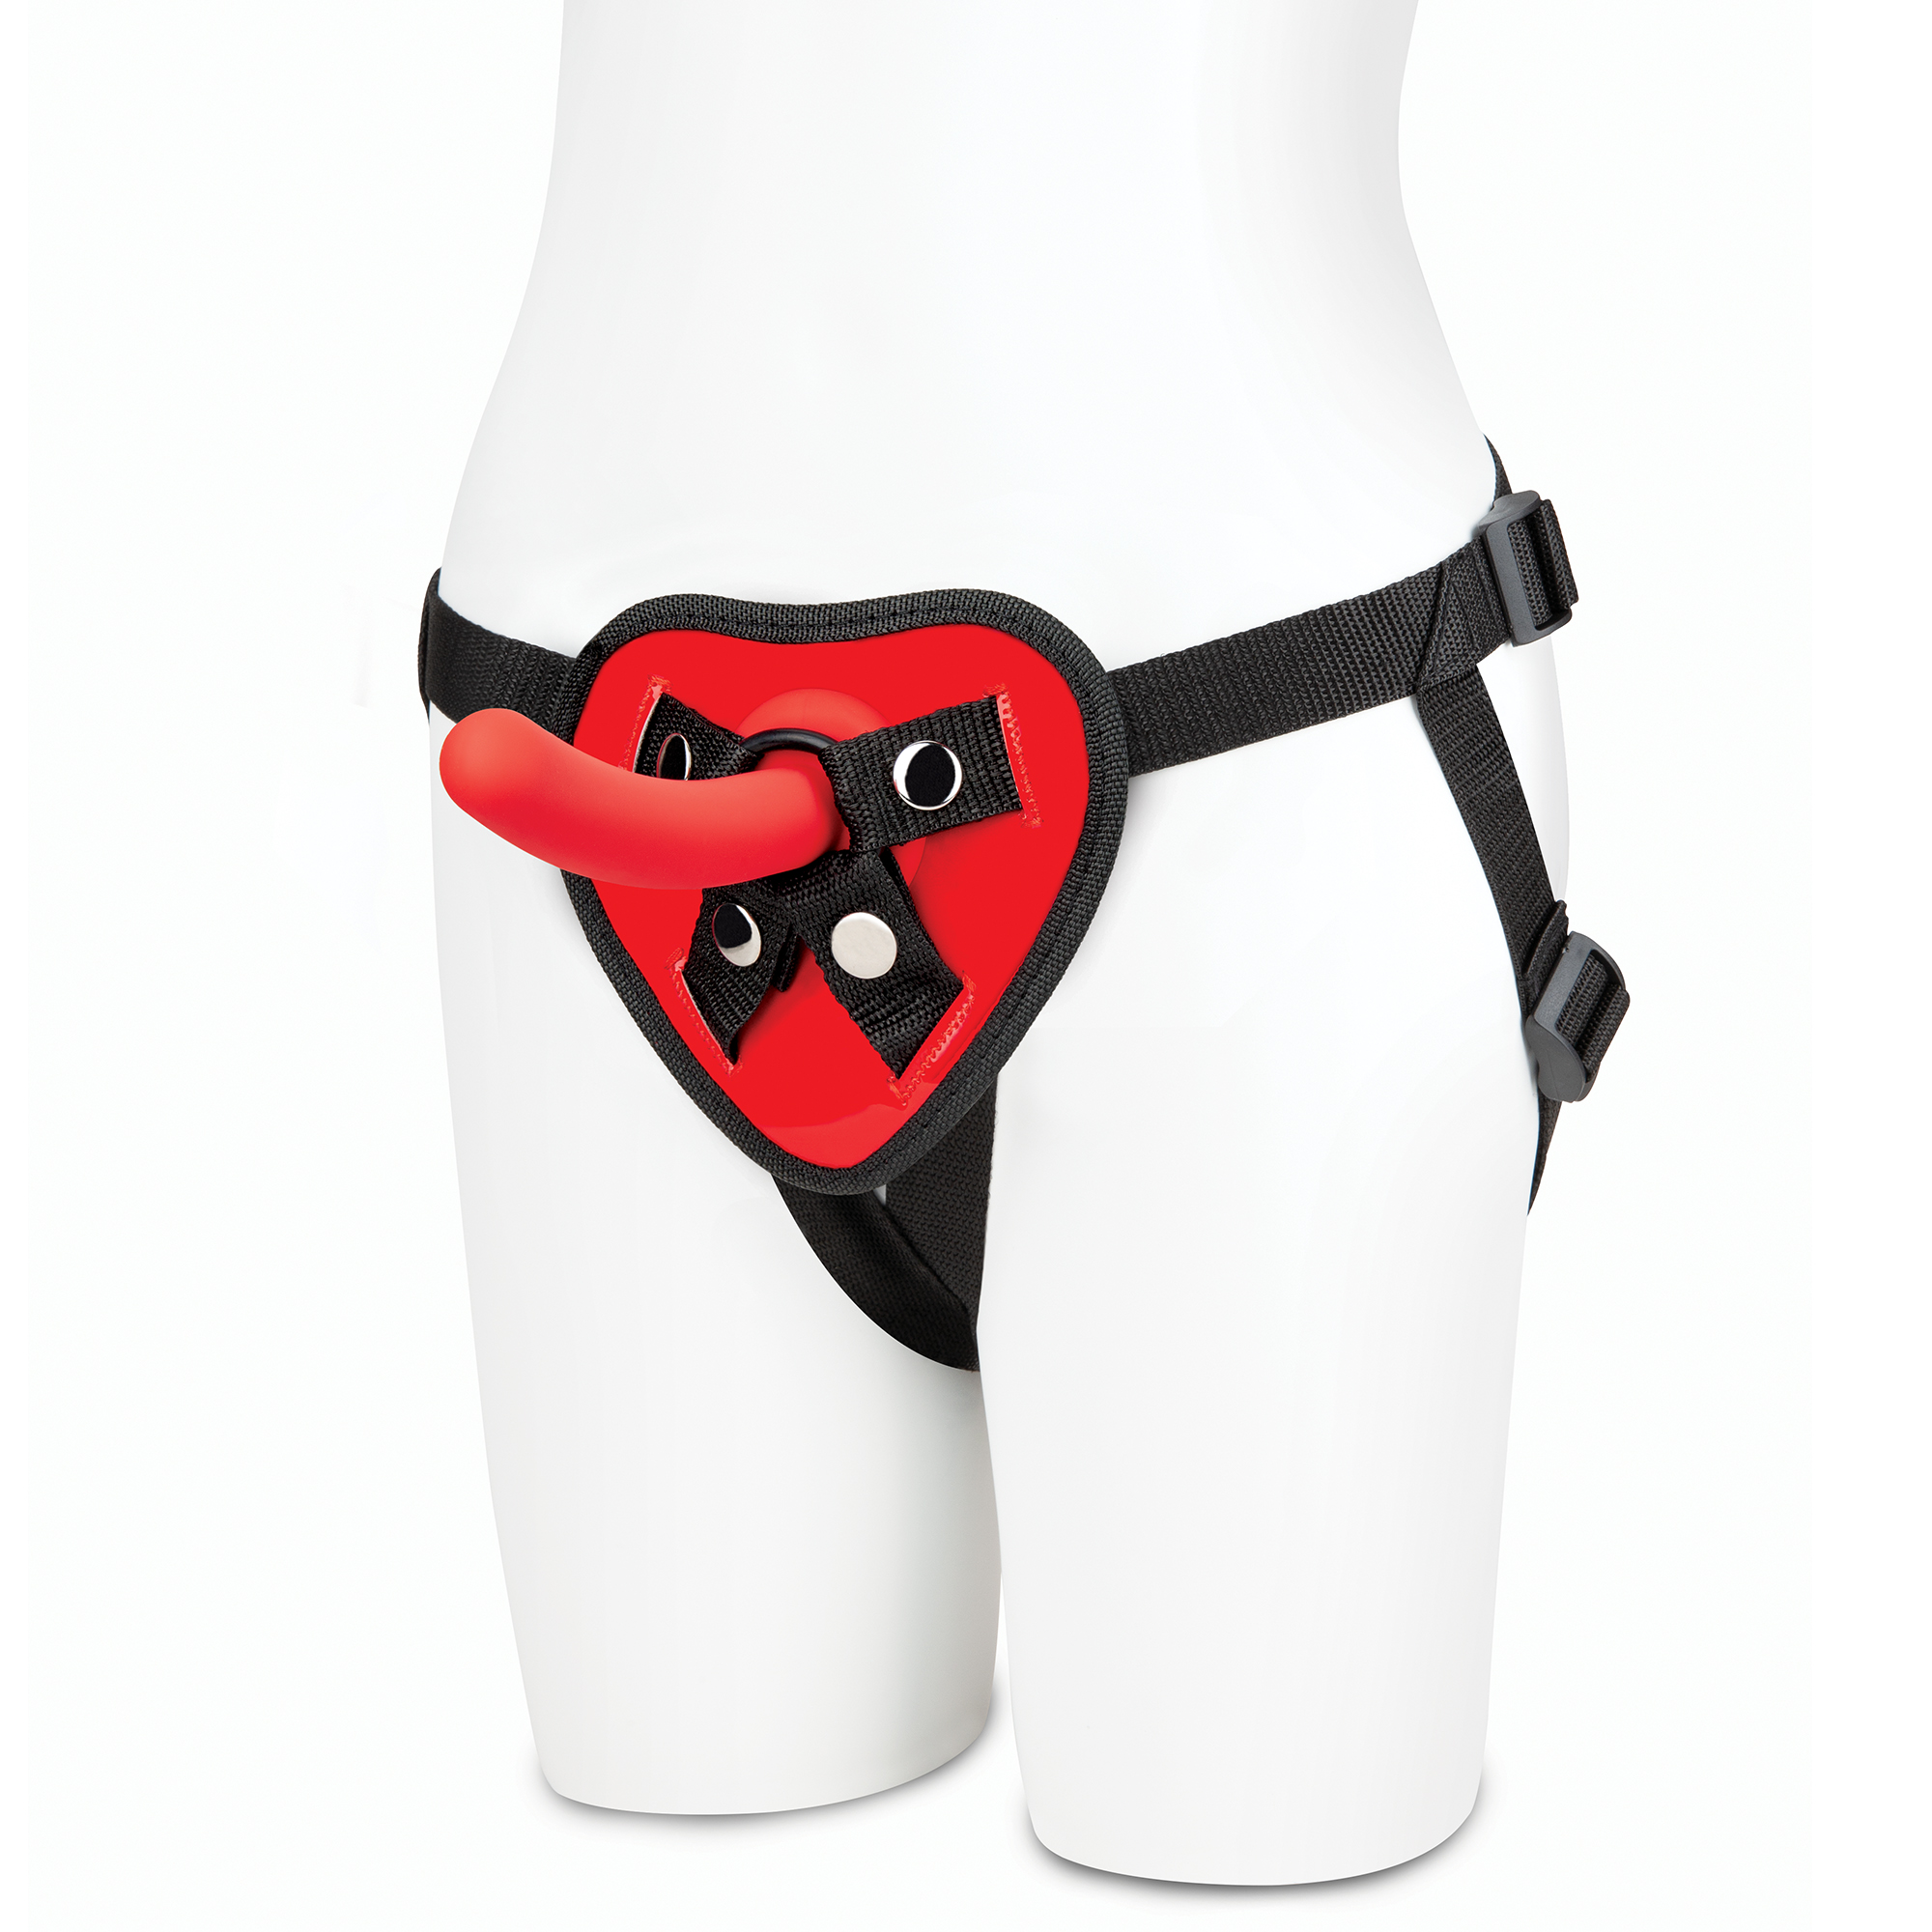 LUX FETISH Red Heart Strap on Harness & 5" Dildo Set